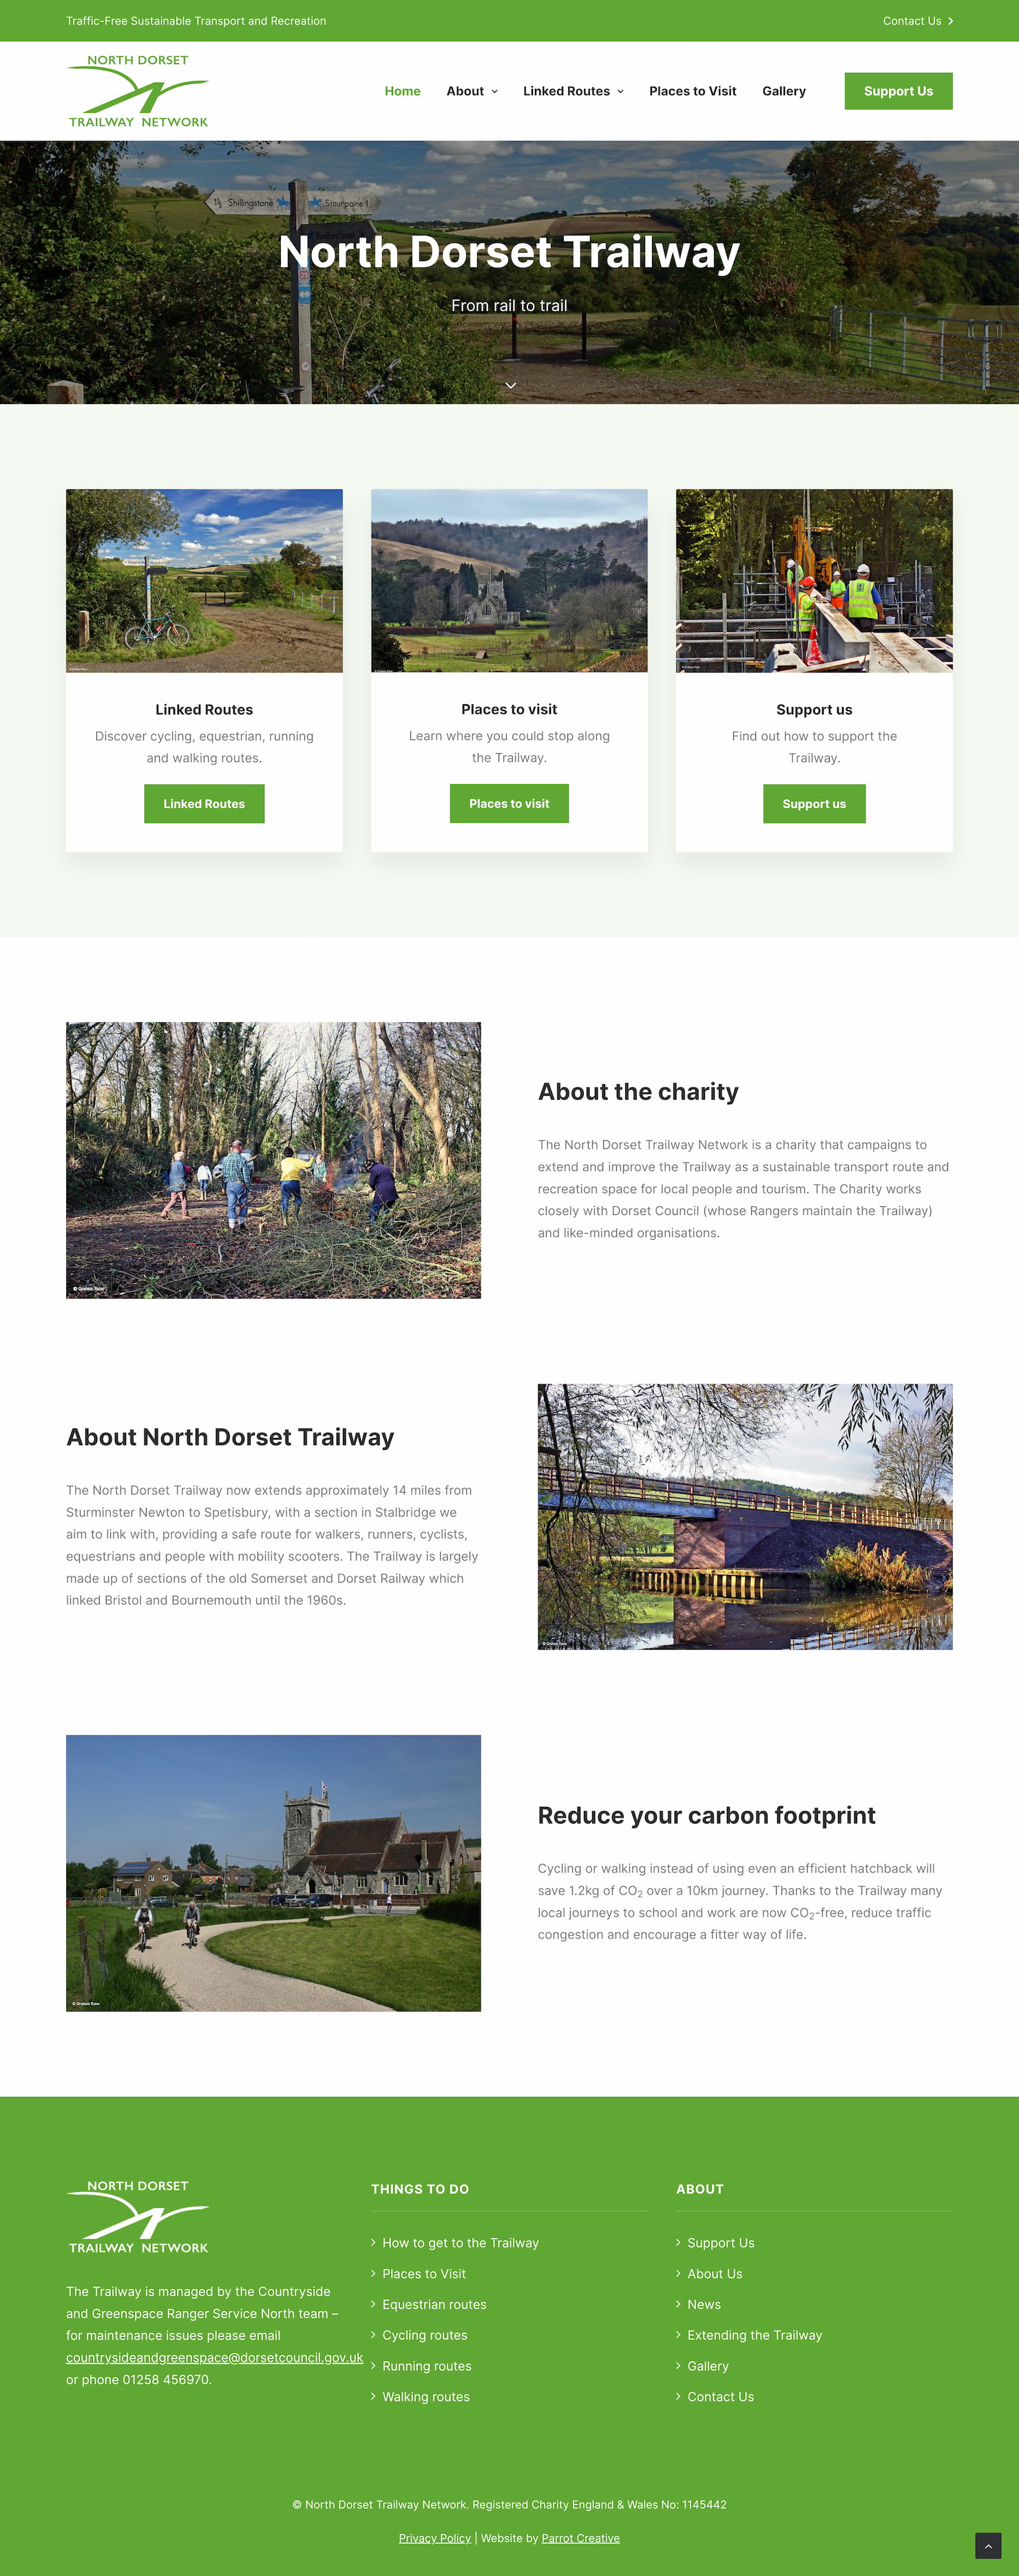 Homepage design of an environmental charity website